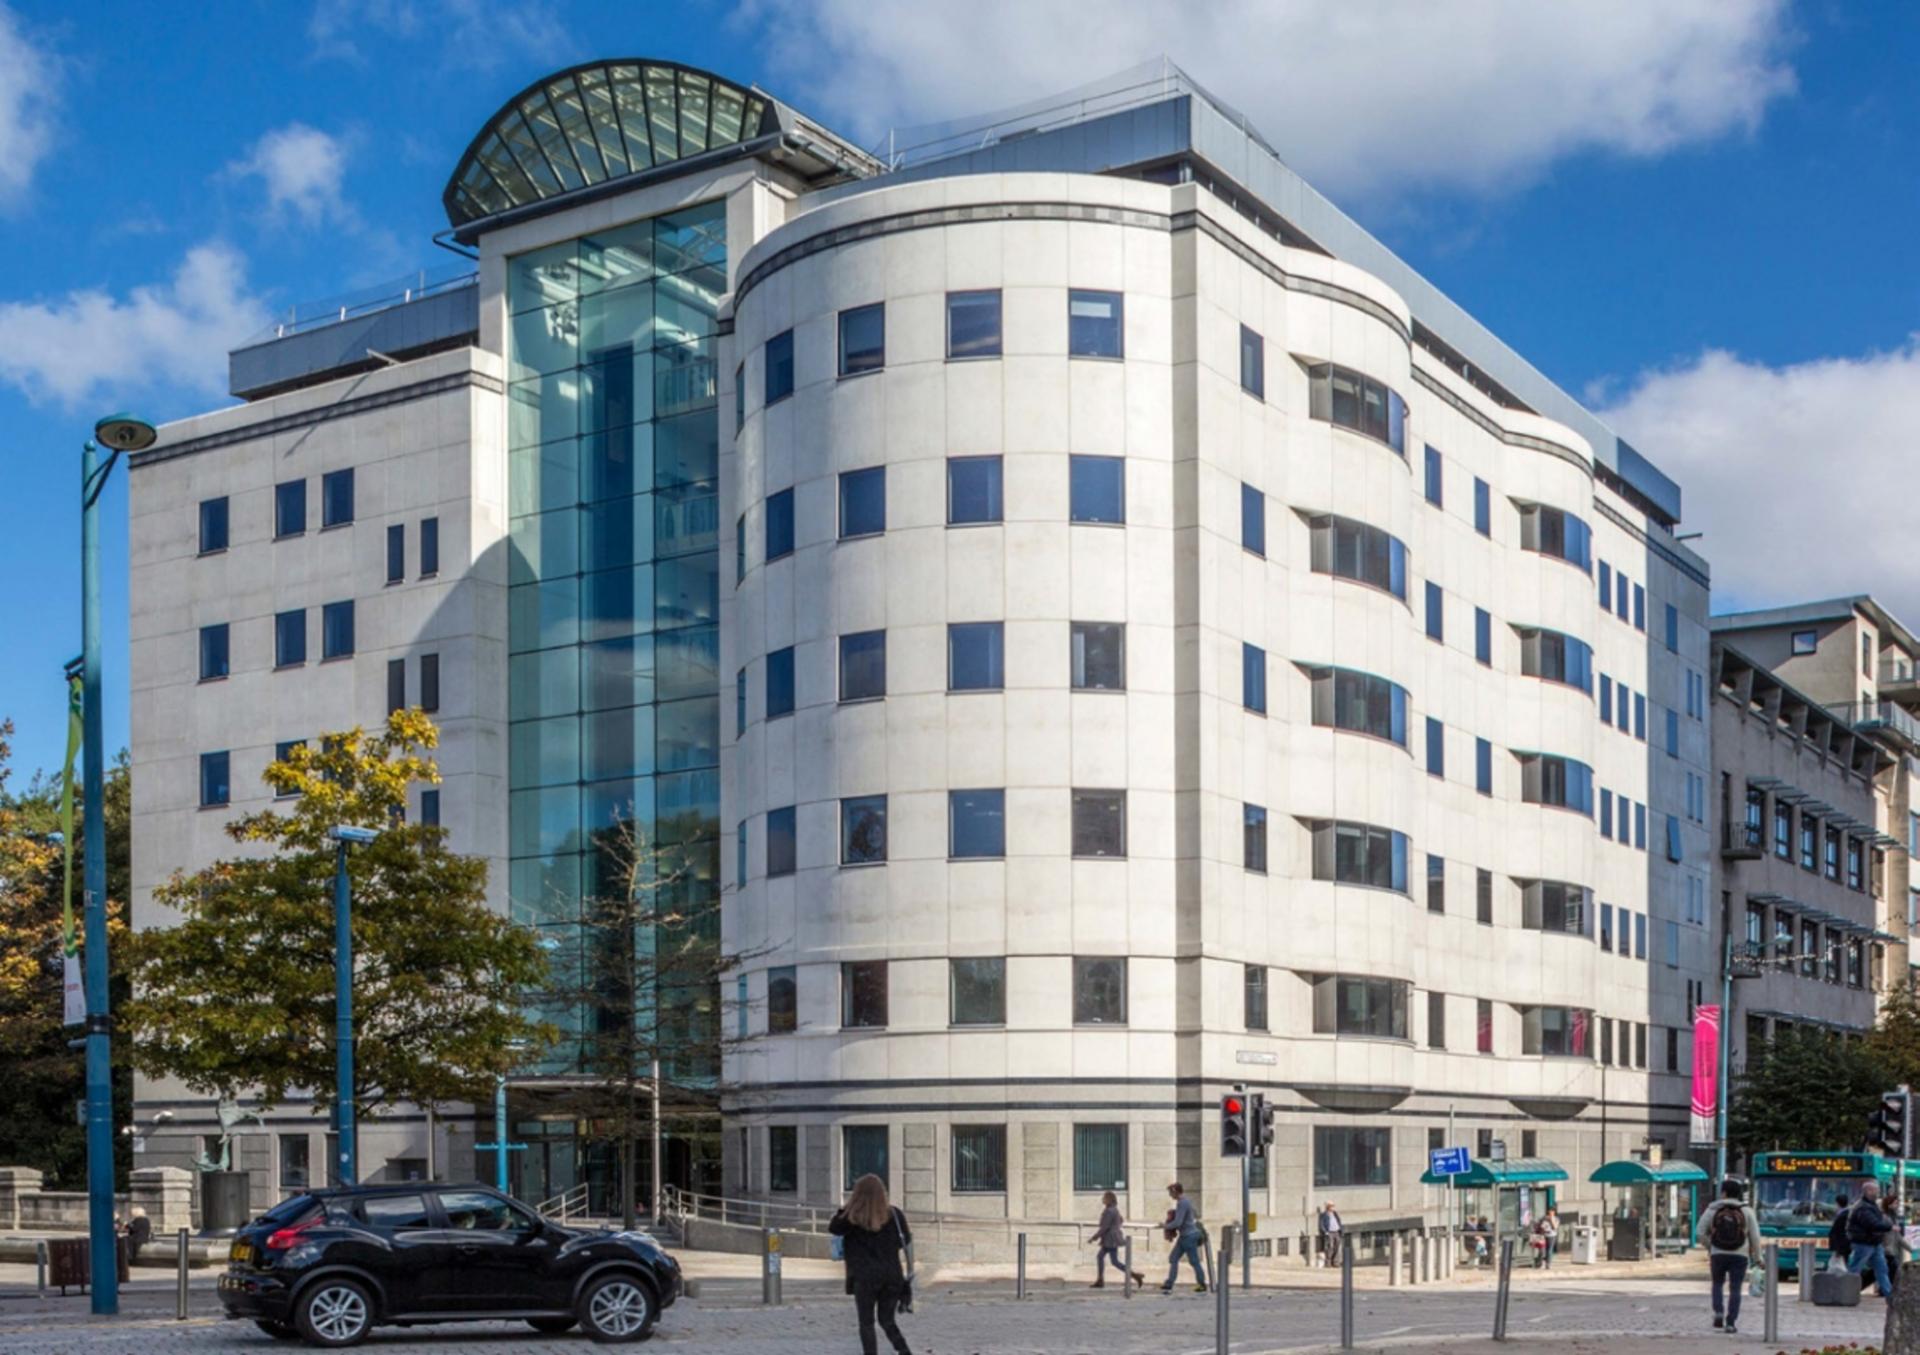 Cardiff city centre office on the market for £17m